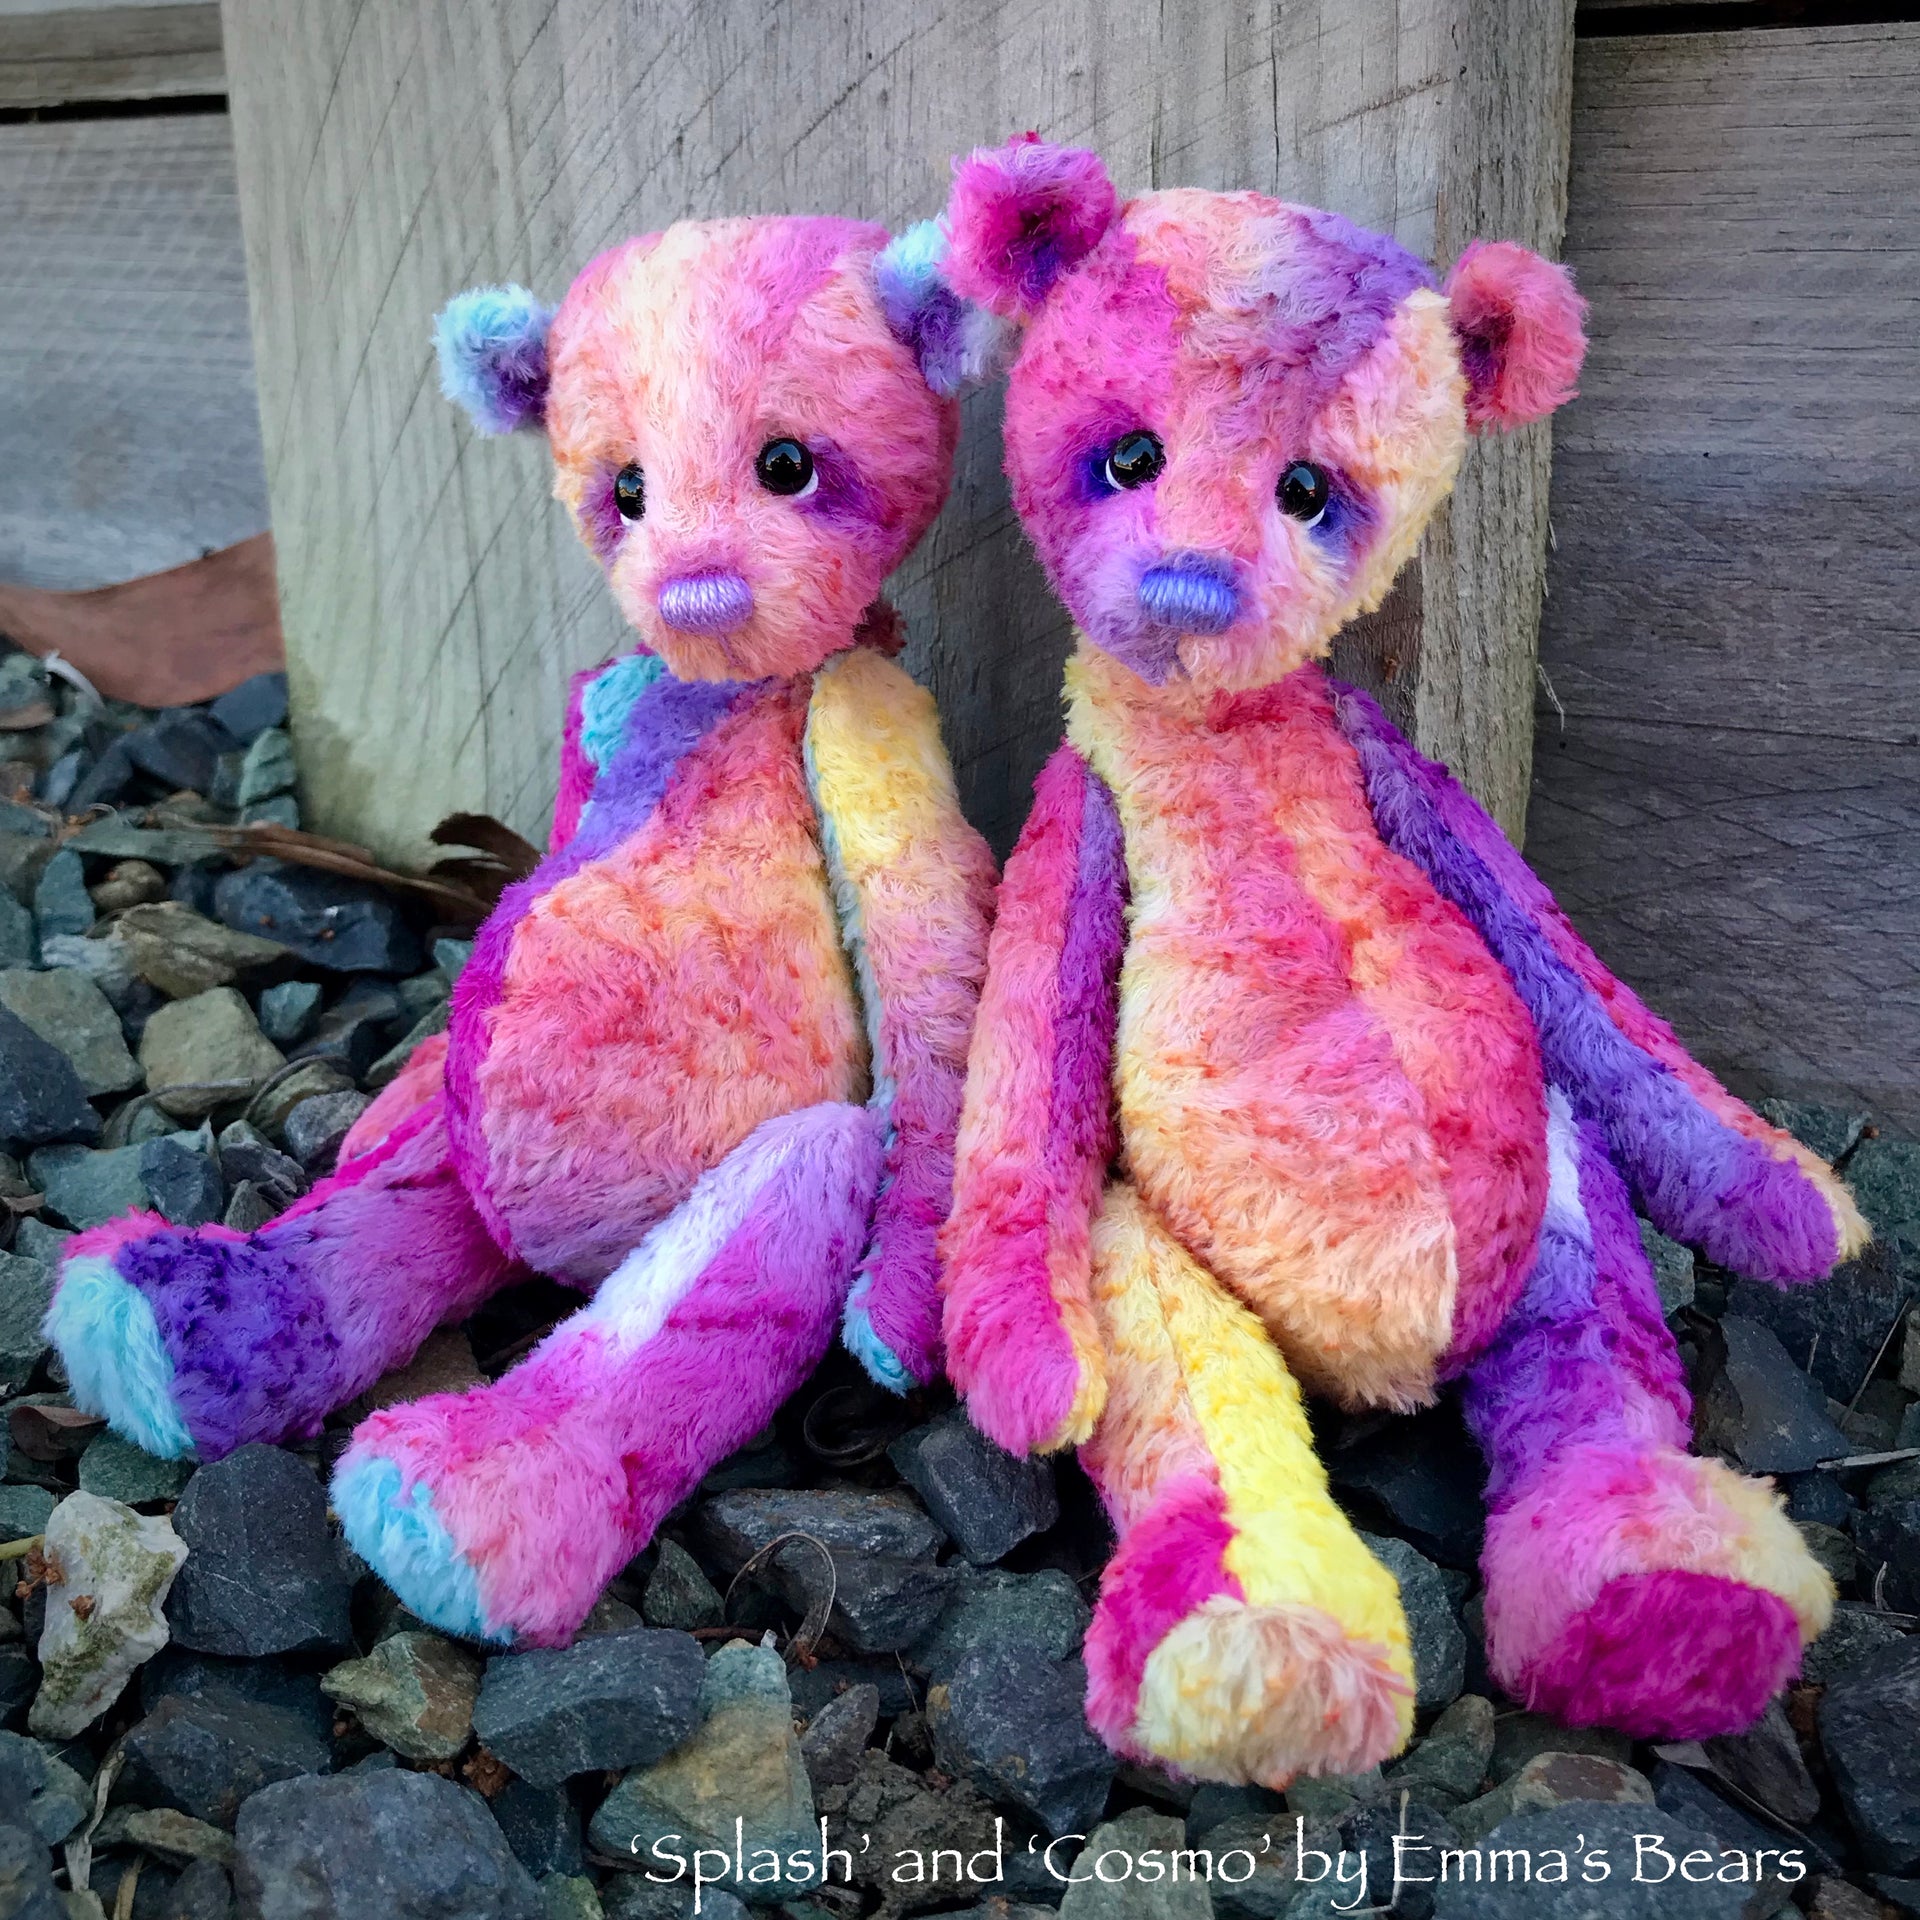 Cosmo - 8" Hand-Dyed Viscose Artist Bear by Emma's Bears - OOAK